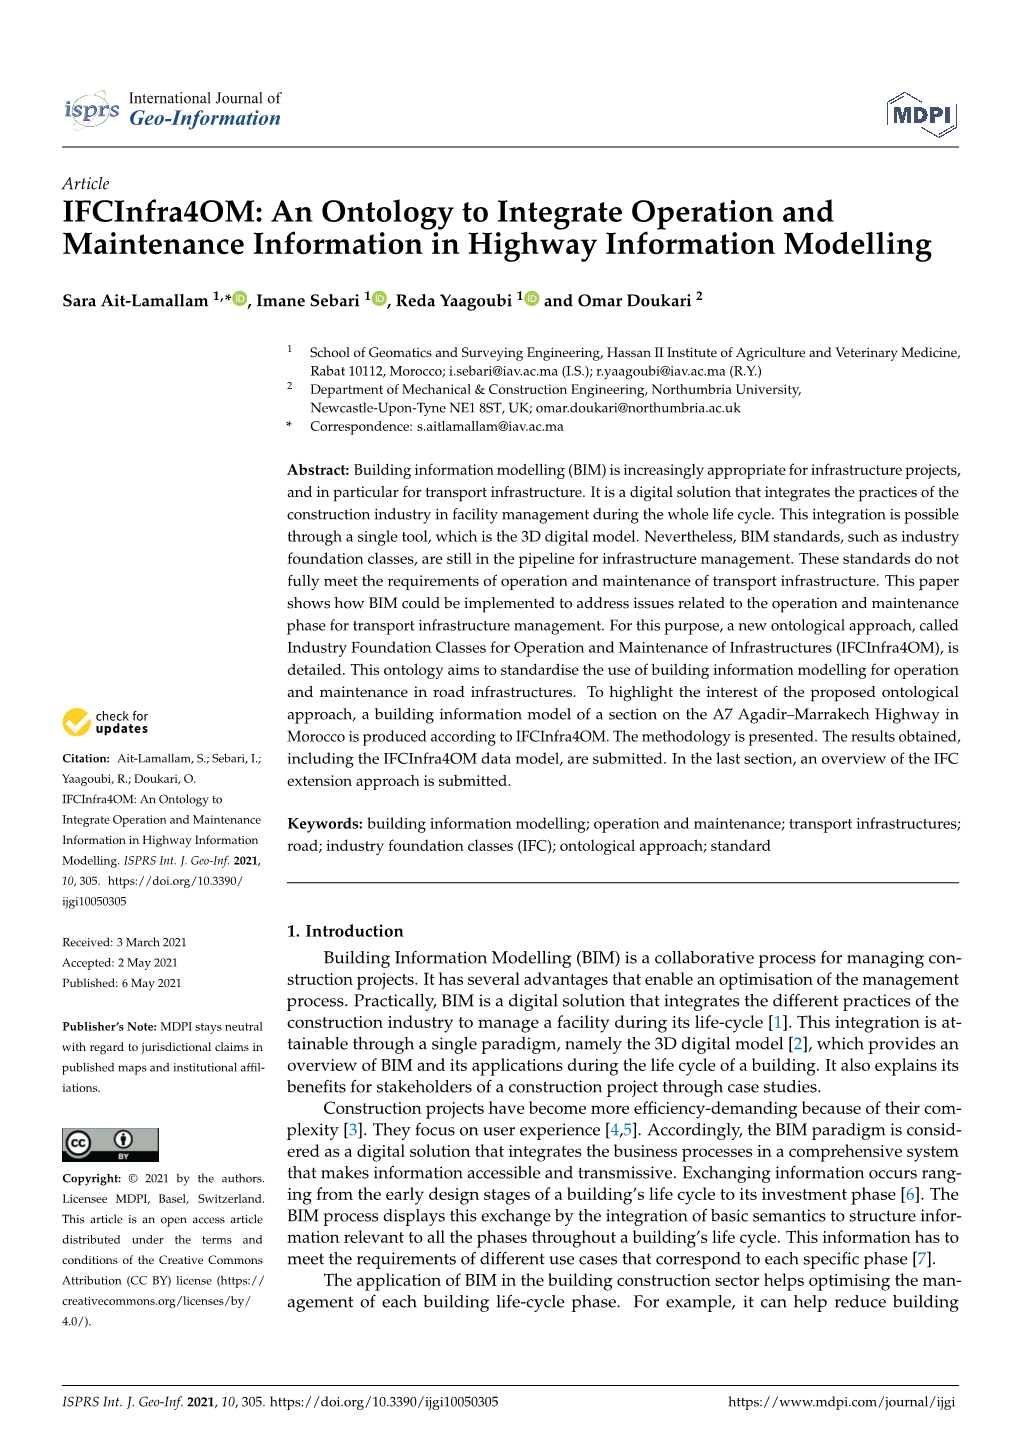 An Ontology to Integrate Operation and Maintenance Information in Highway Information Modelling